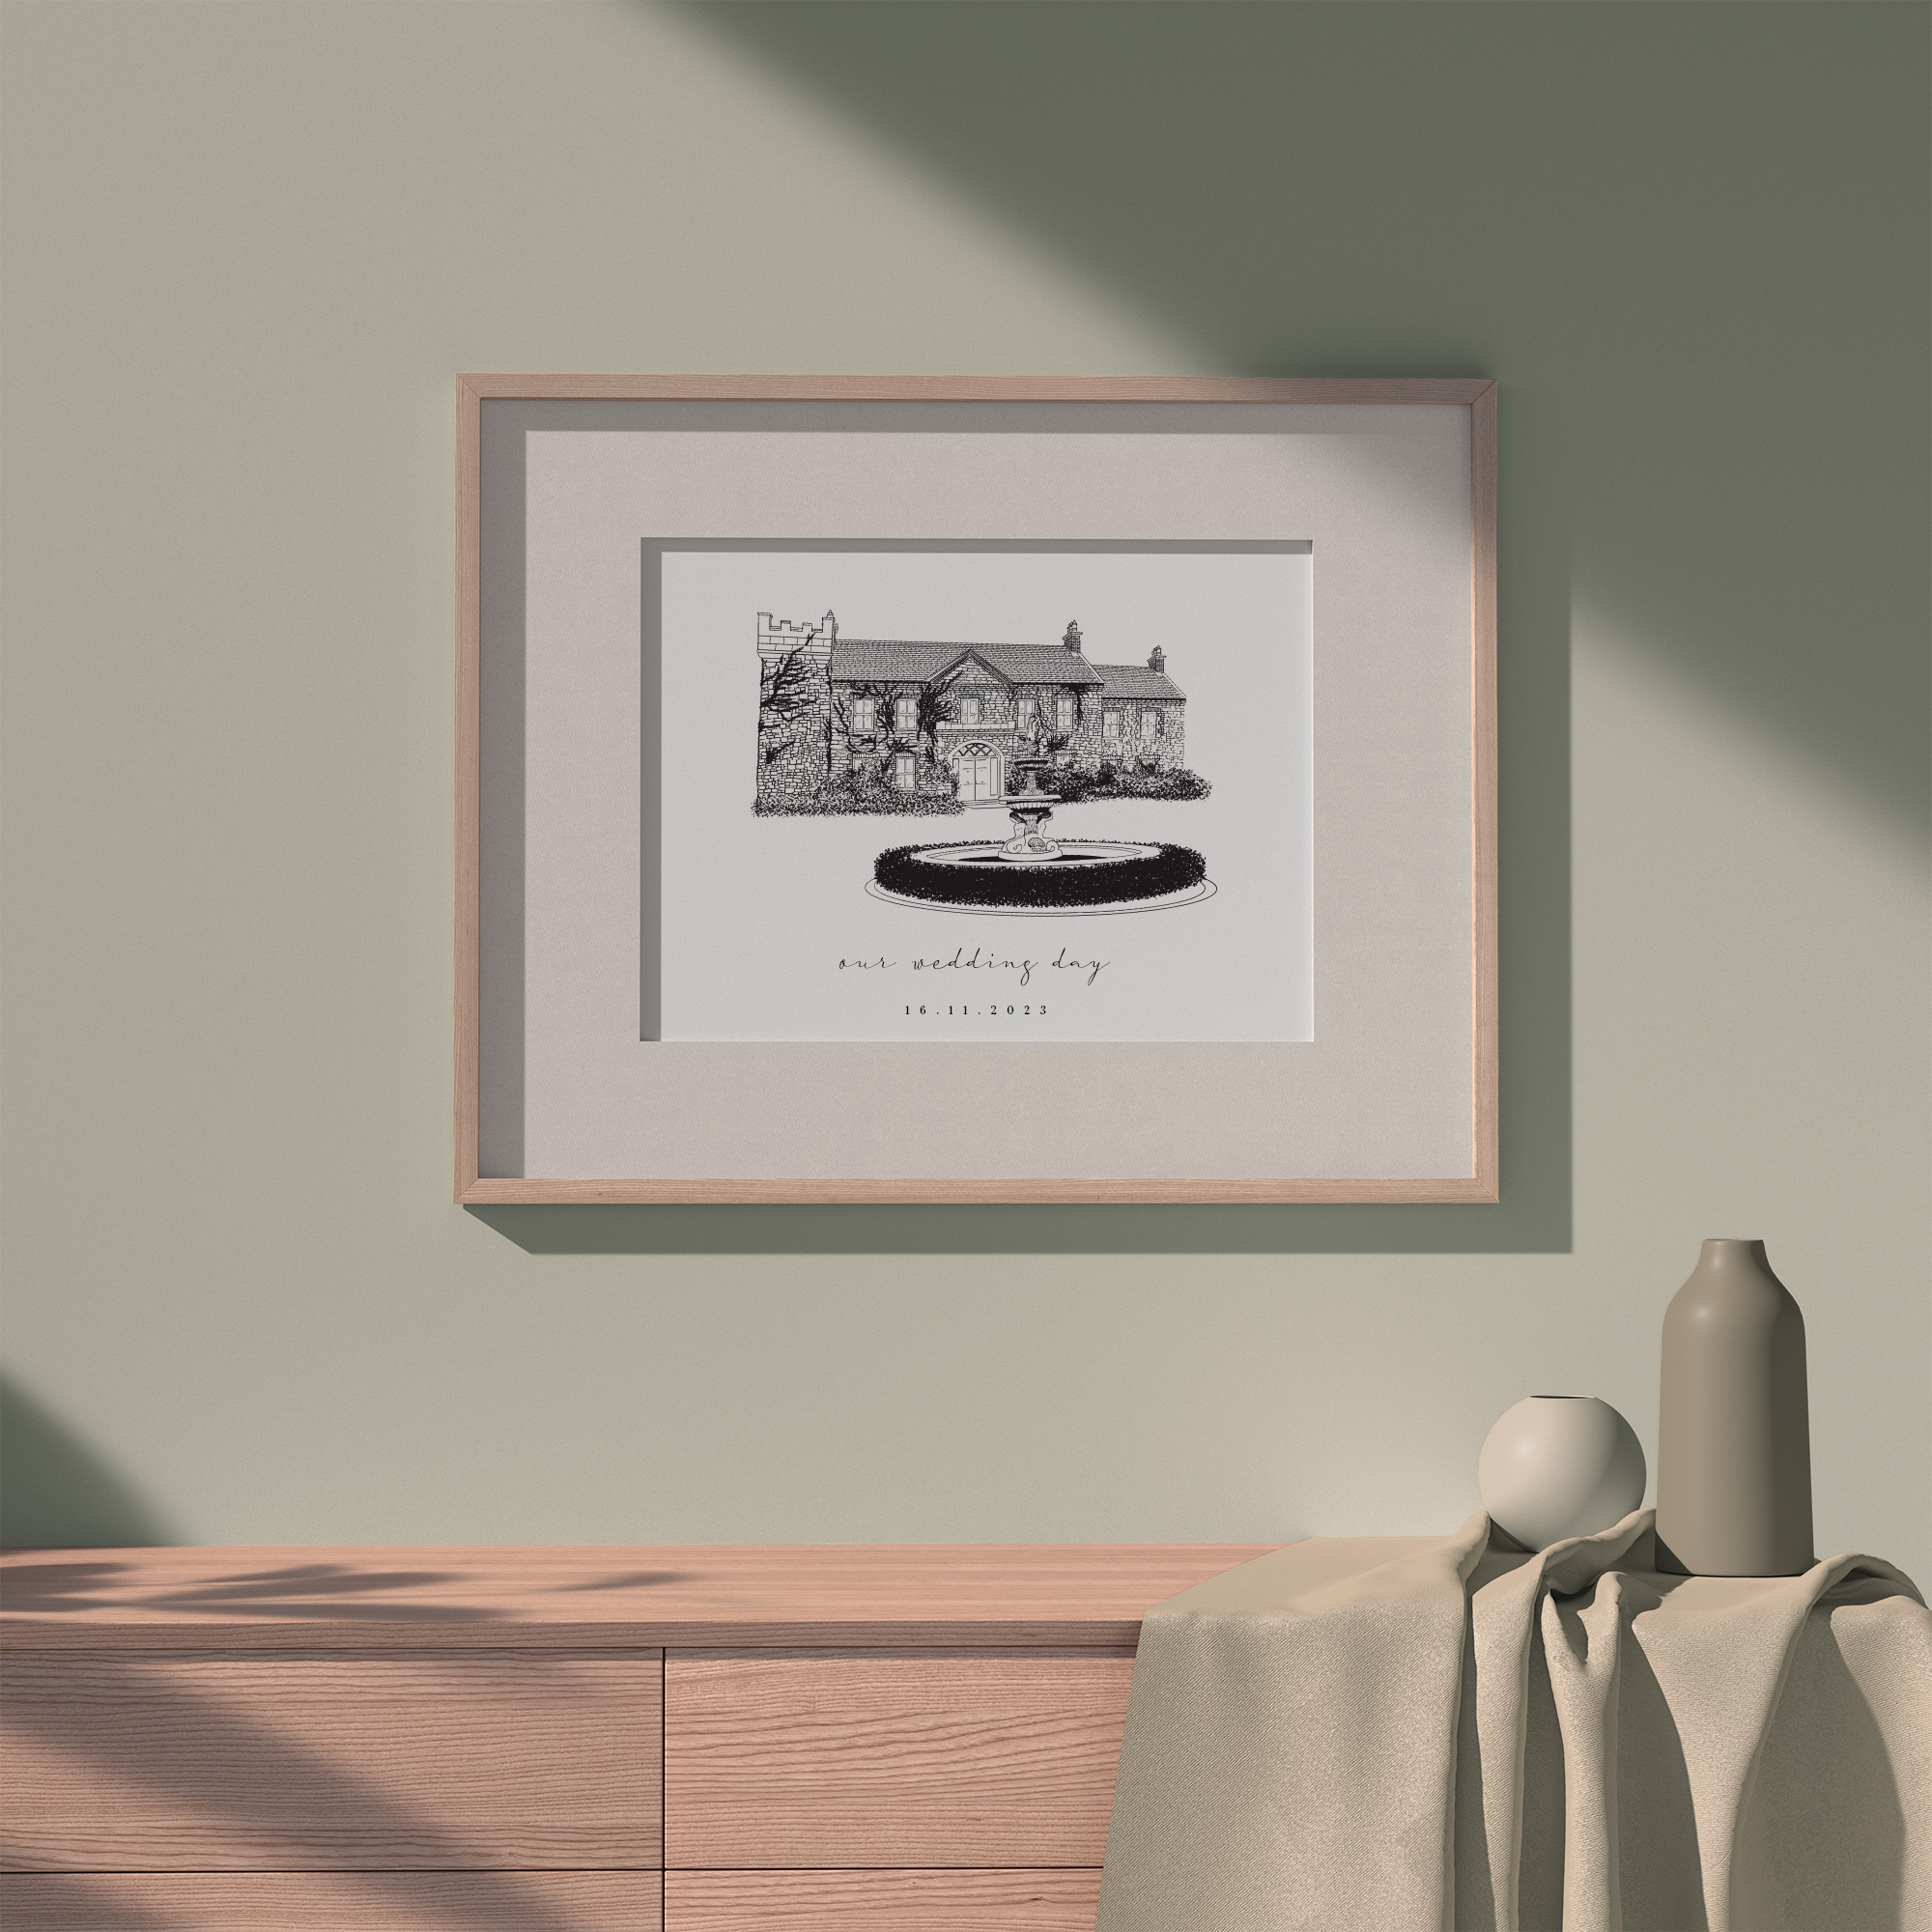 Illustration of Ballymagarvey Village Wedding Venue that can be personalised with Names and Dates. Makes the perfect Wedding or Anniversary Gift